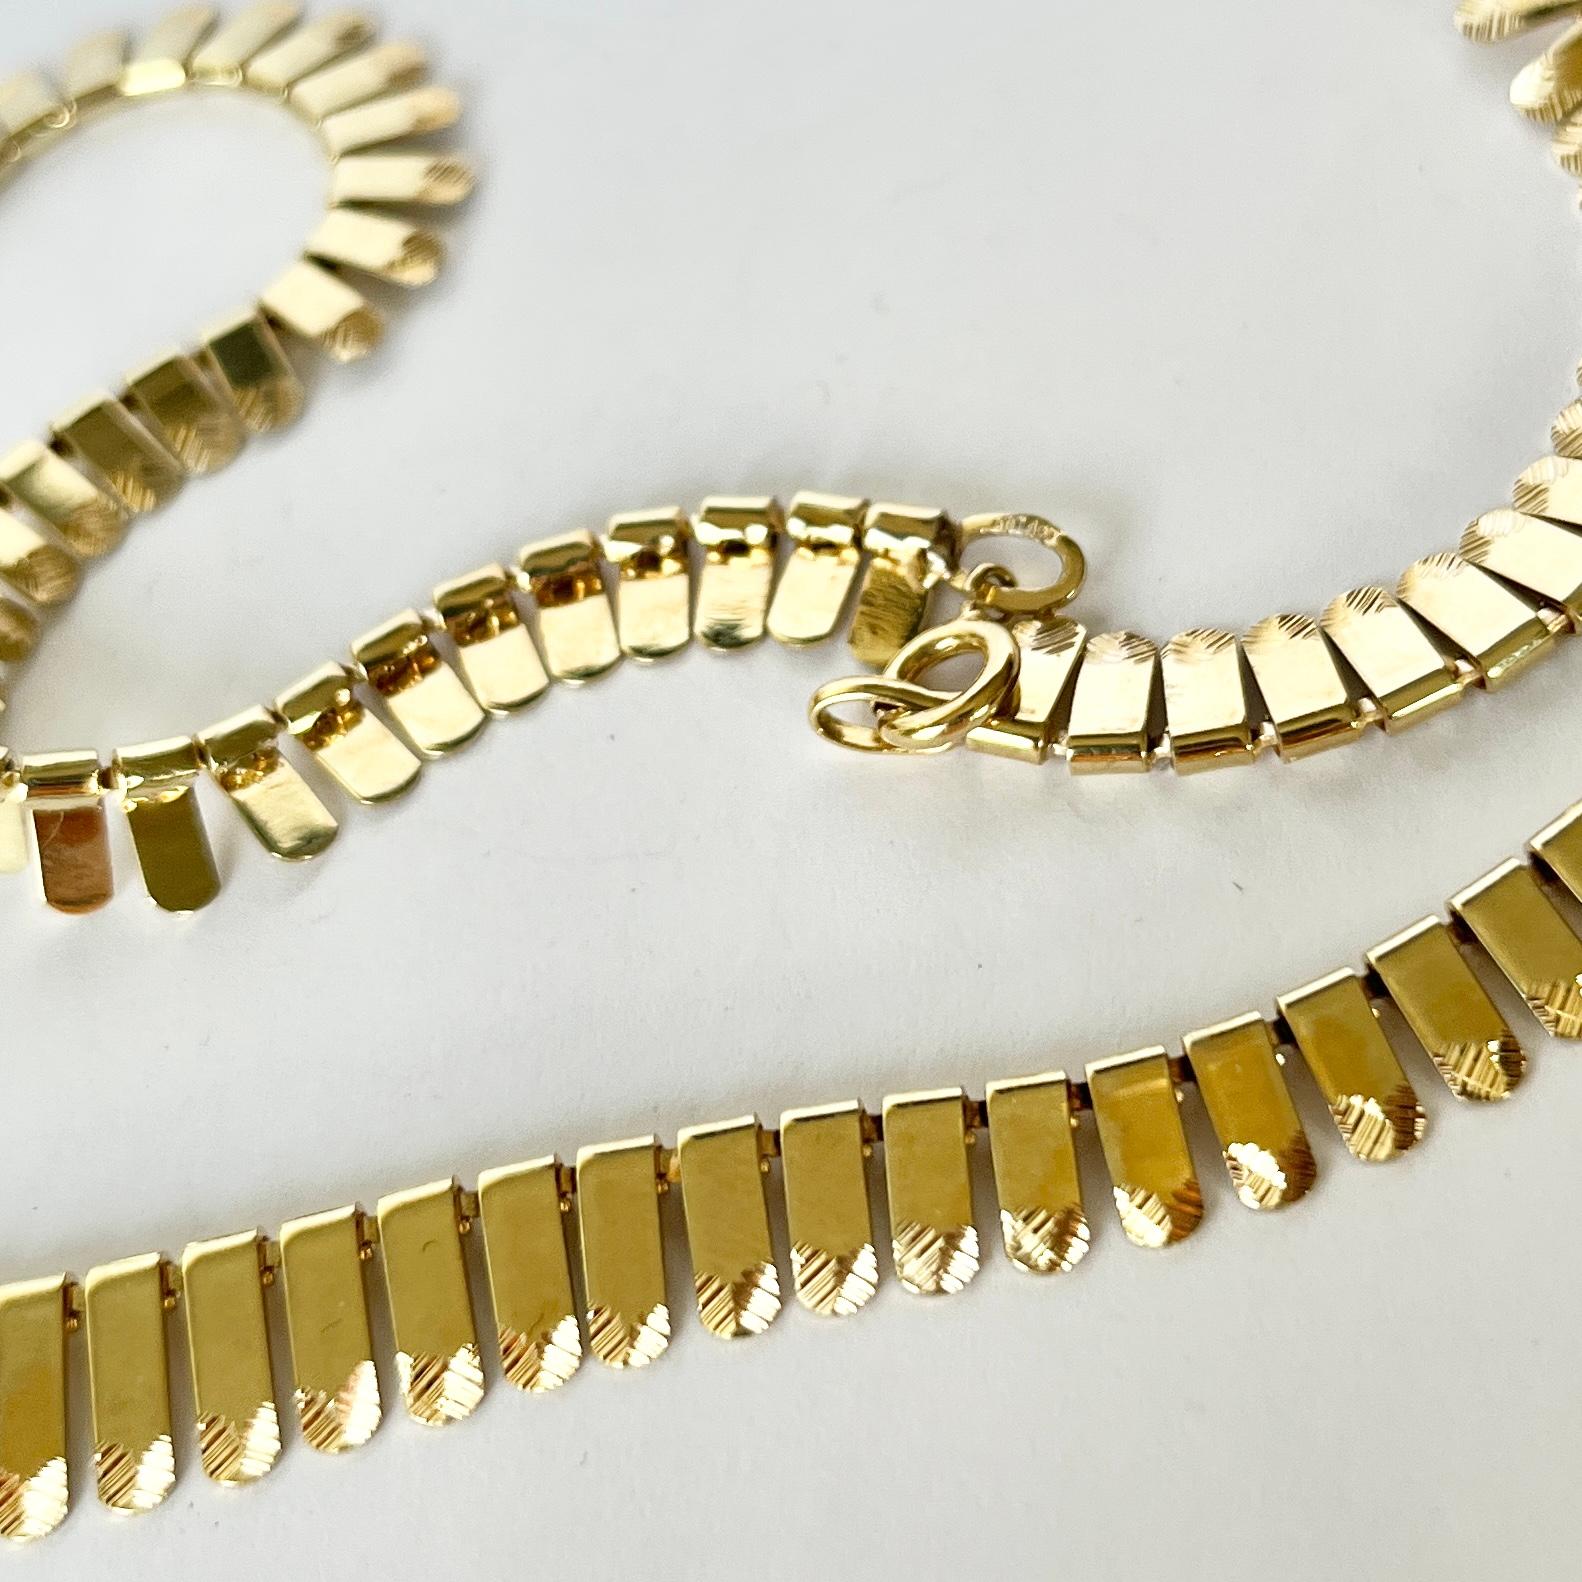 This beautiful vintage 9ct gold collar is flat and sits beautifully. It is fastened using a simple clasp. Fully hallmarked Birmingham 1977.

Length: 42cm
Widest and Slimmest Point: 10-6.5mm 

Weight: 16g